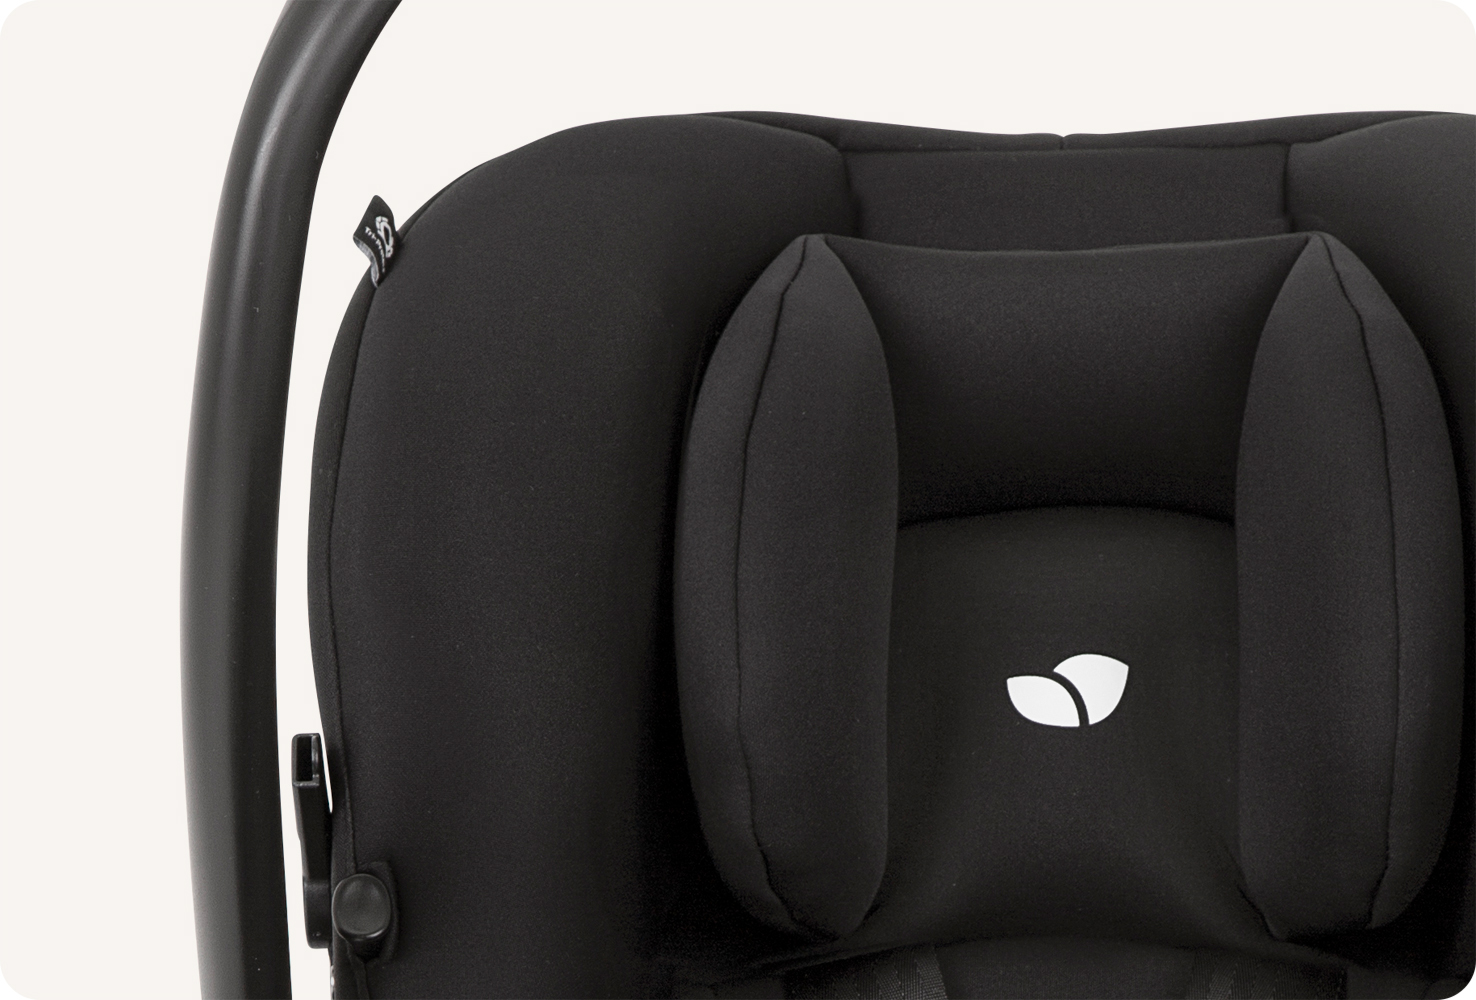  Joie I-snug 2 infant car seat in a two-tone black colour in a close up of headrest on front position. 